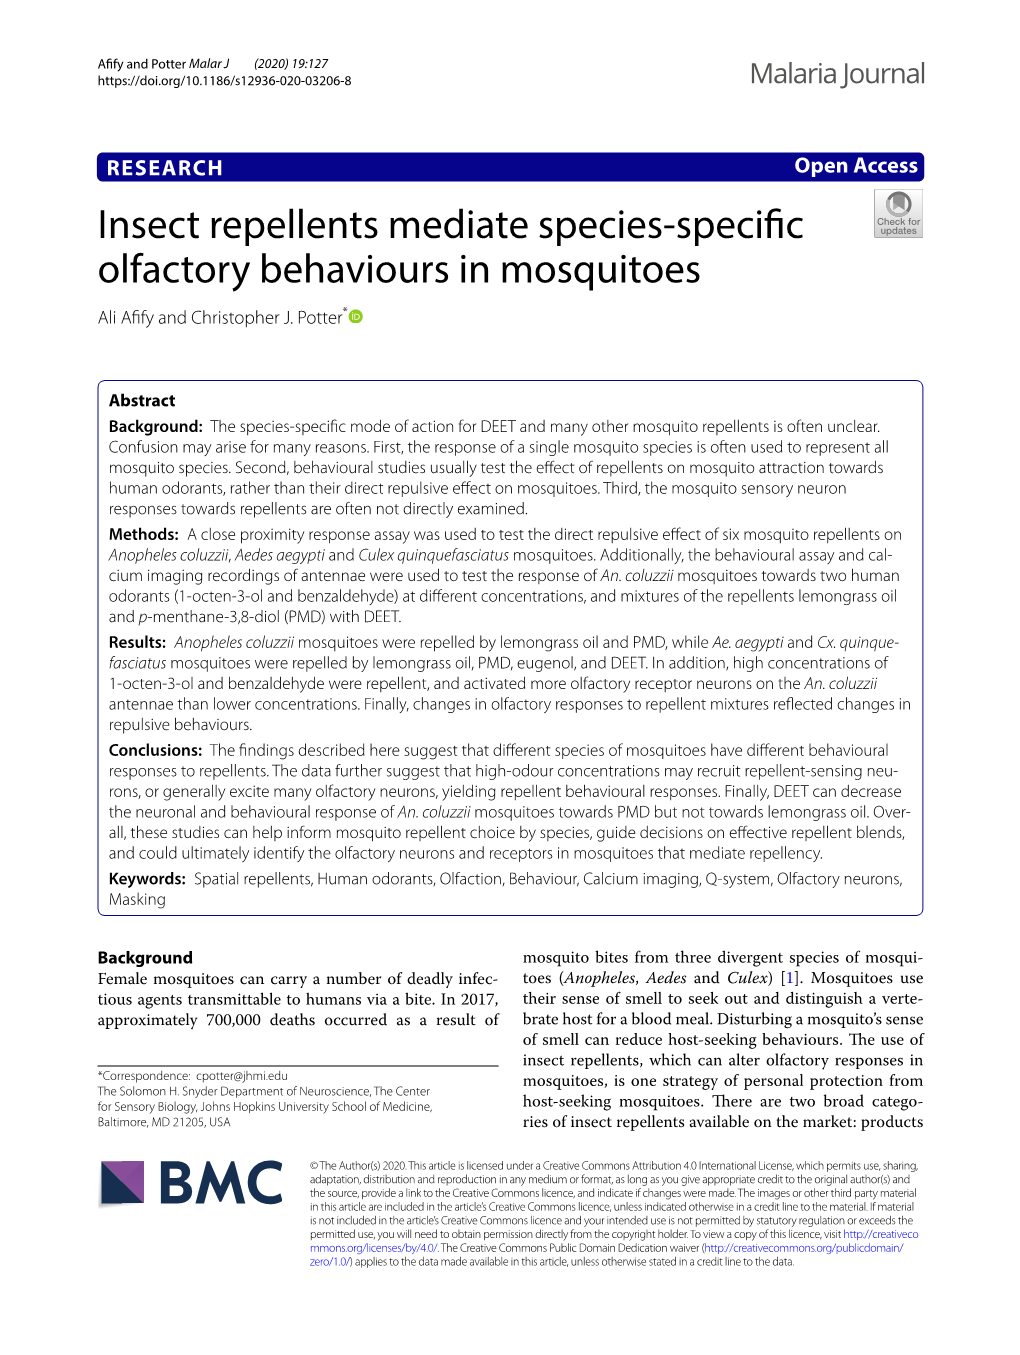 Insect Repellents Mediate Species-Specific